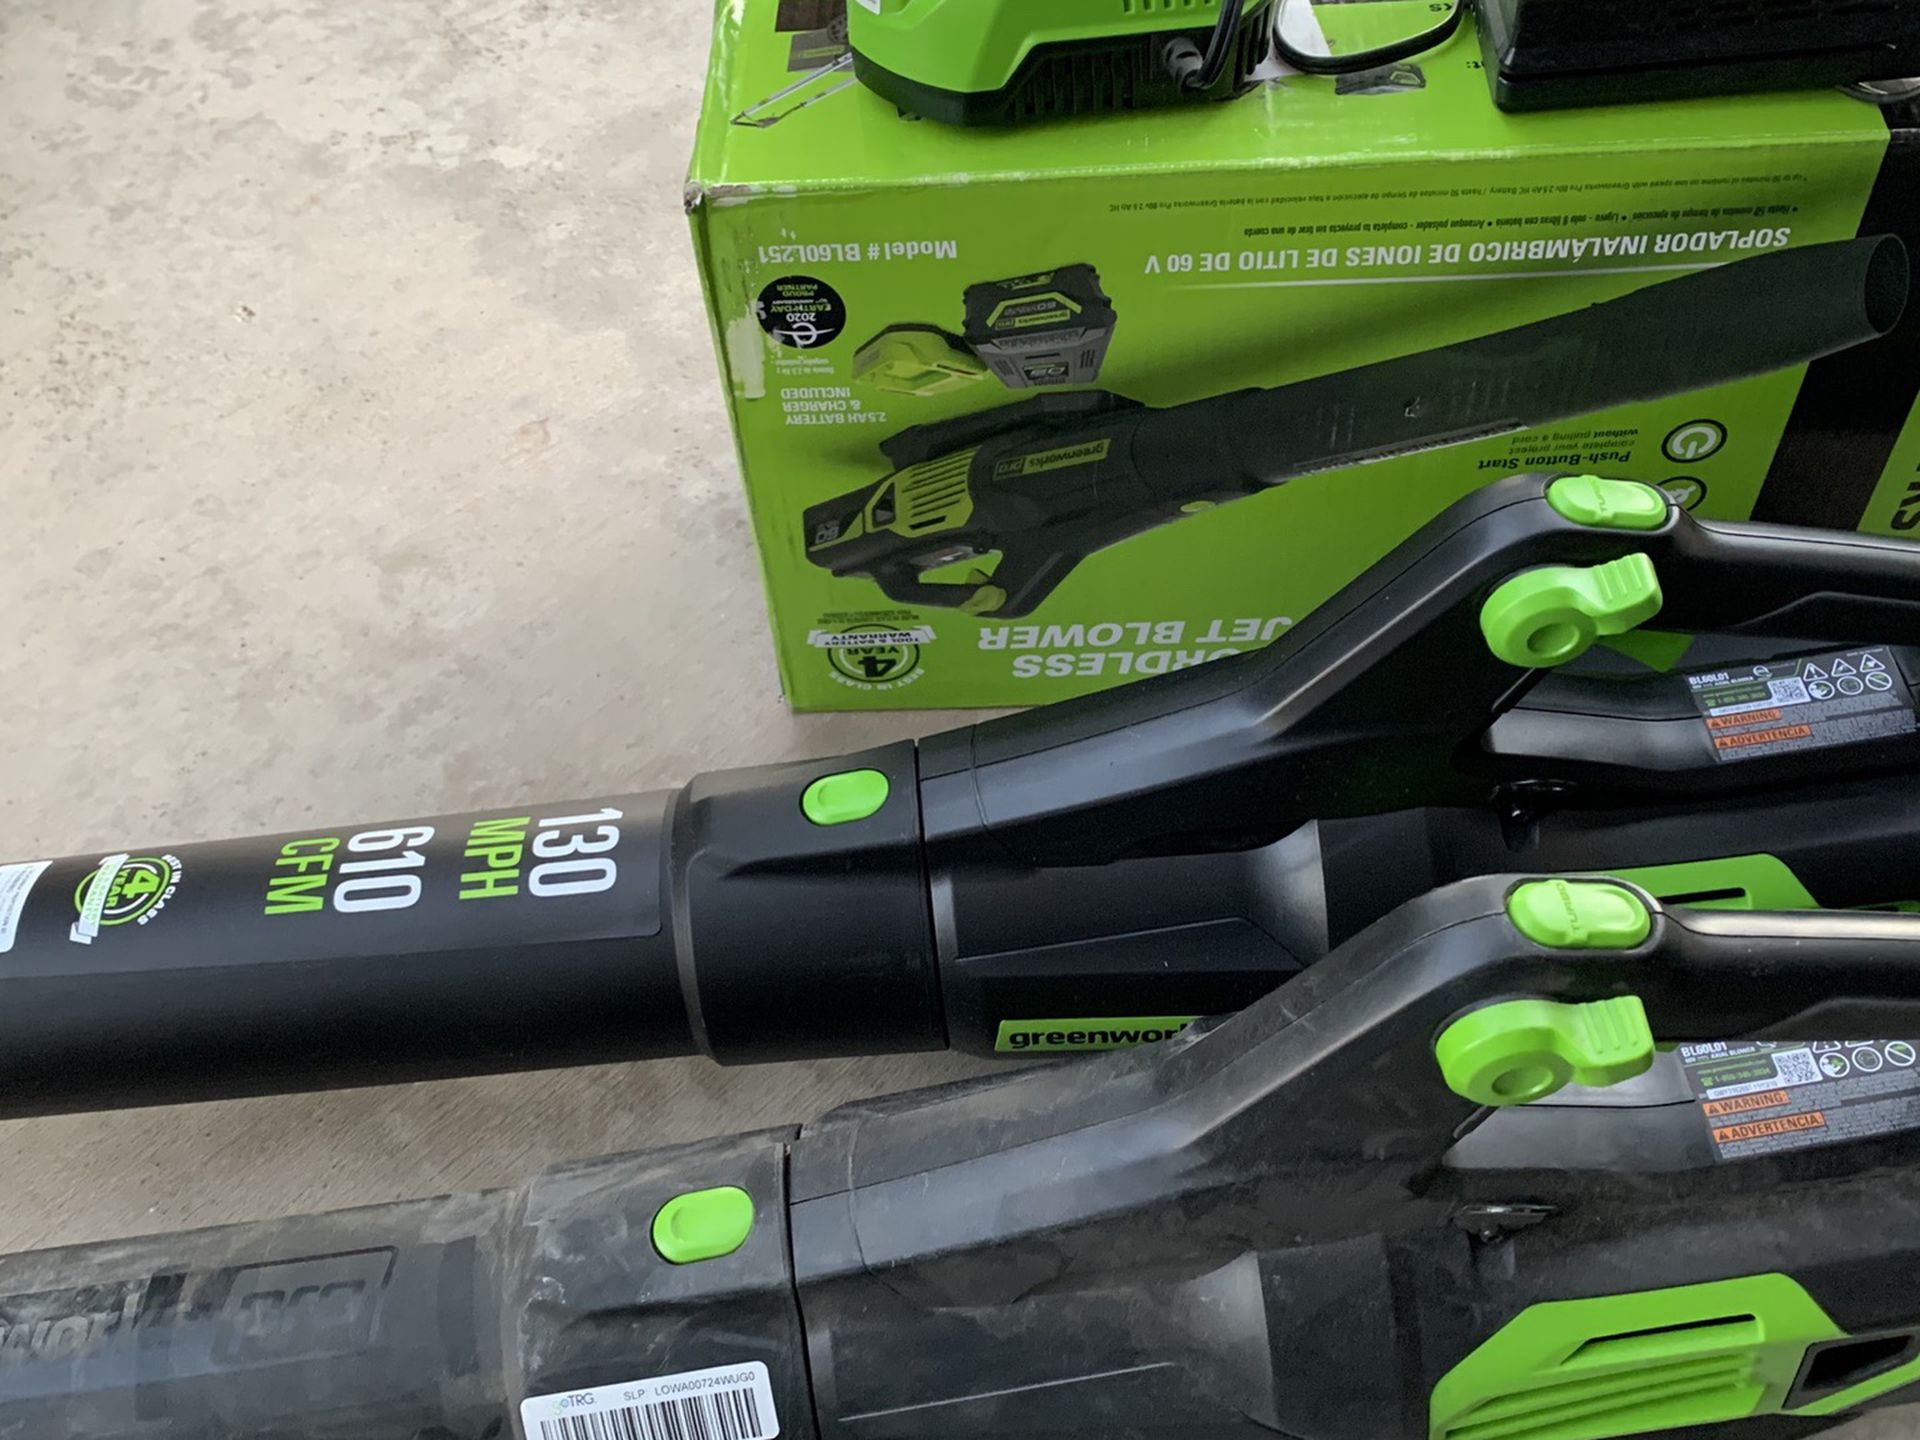 Greenworks 125 Mph 80v Max Lithium Ion Brushless Handheld Cordless Electric Leaf Blower